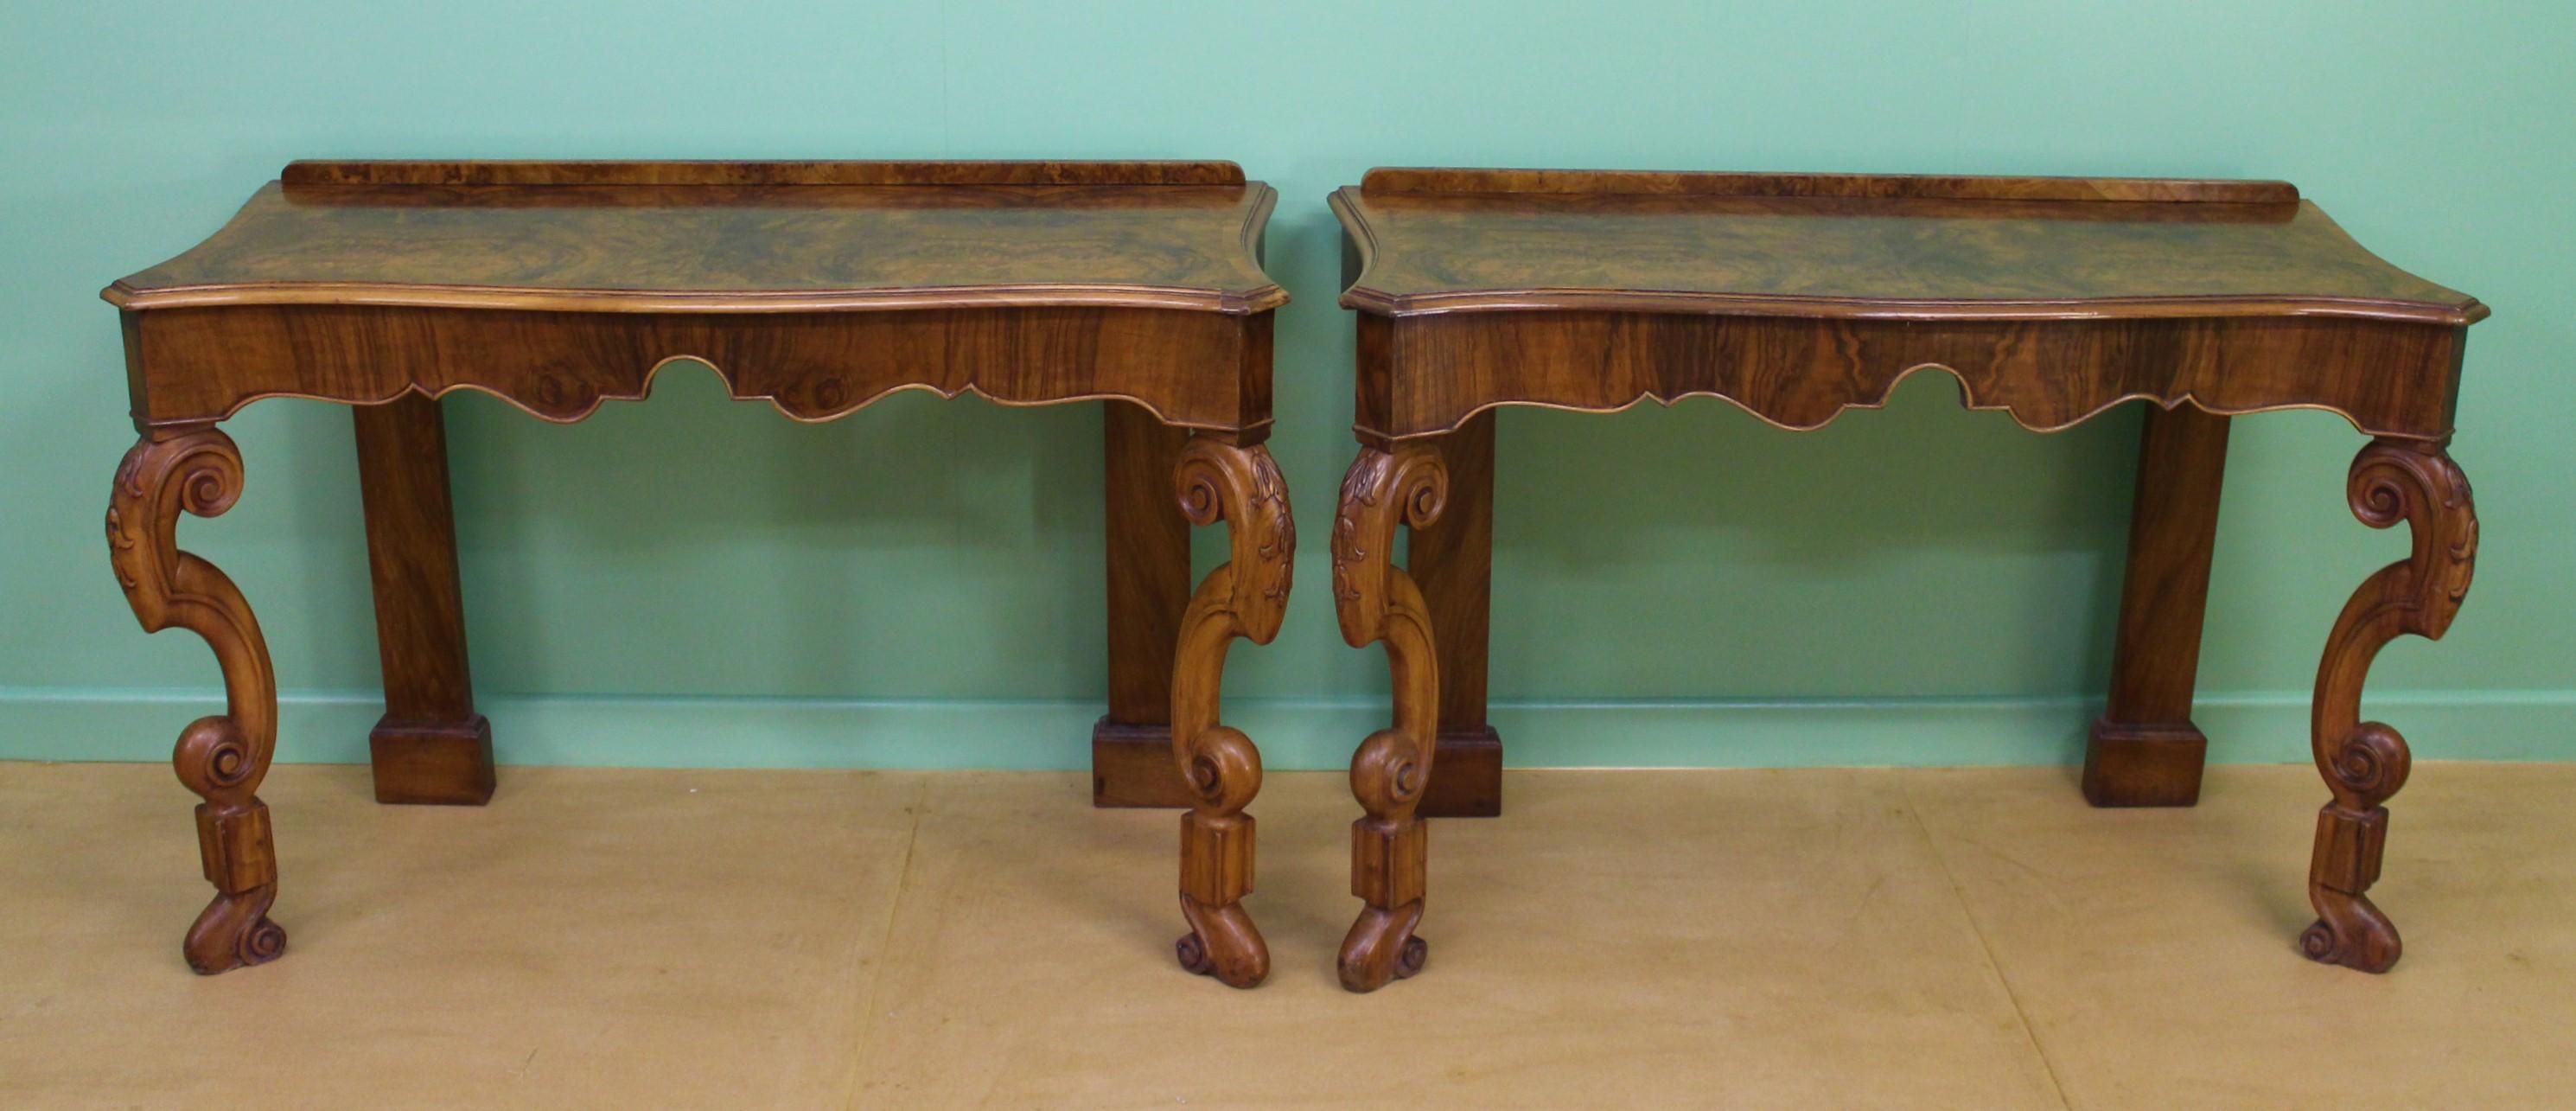 An impressive pair of console tables in attractive burr walnut. They are of good construction in solid walnut with lovely burr walnut veneers. They have been adapted from a larger table. They are of serpentine form with stylish scrolling front legs.